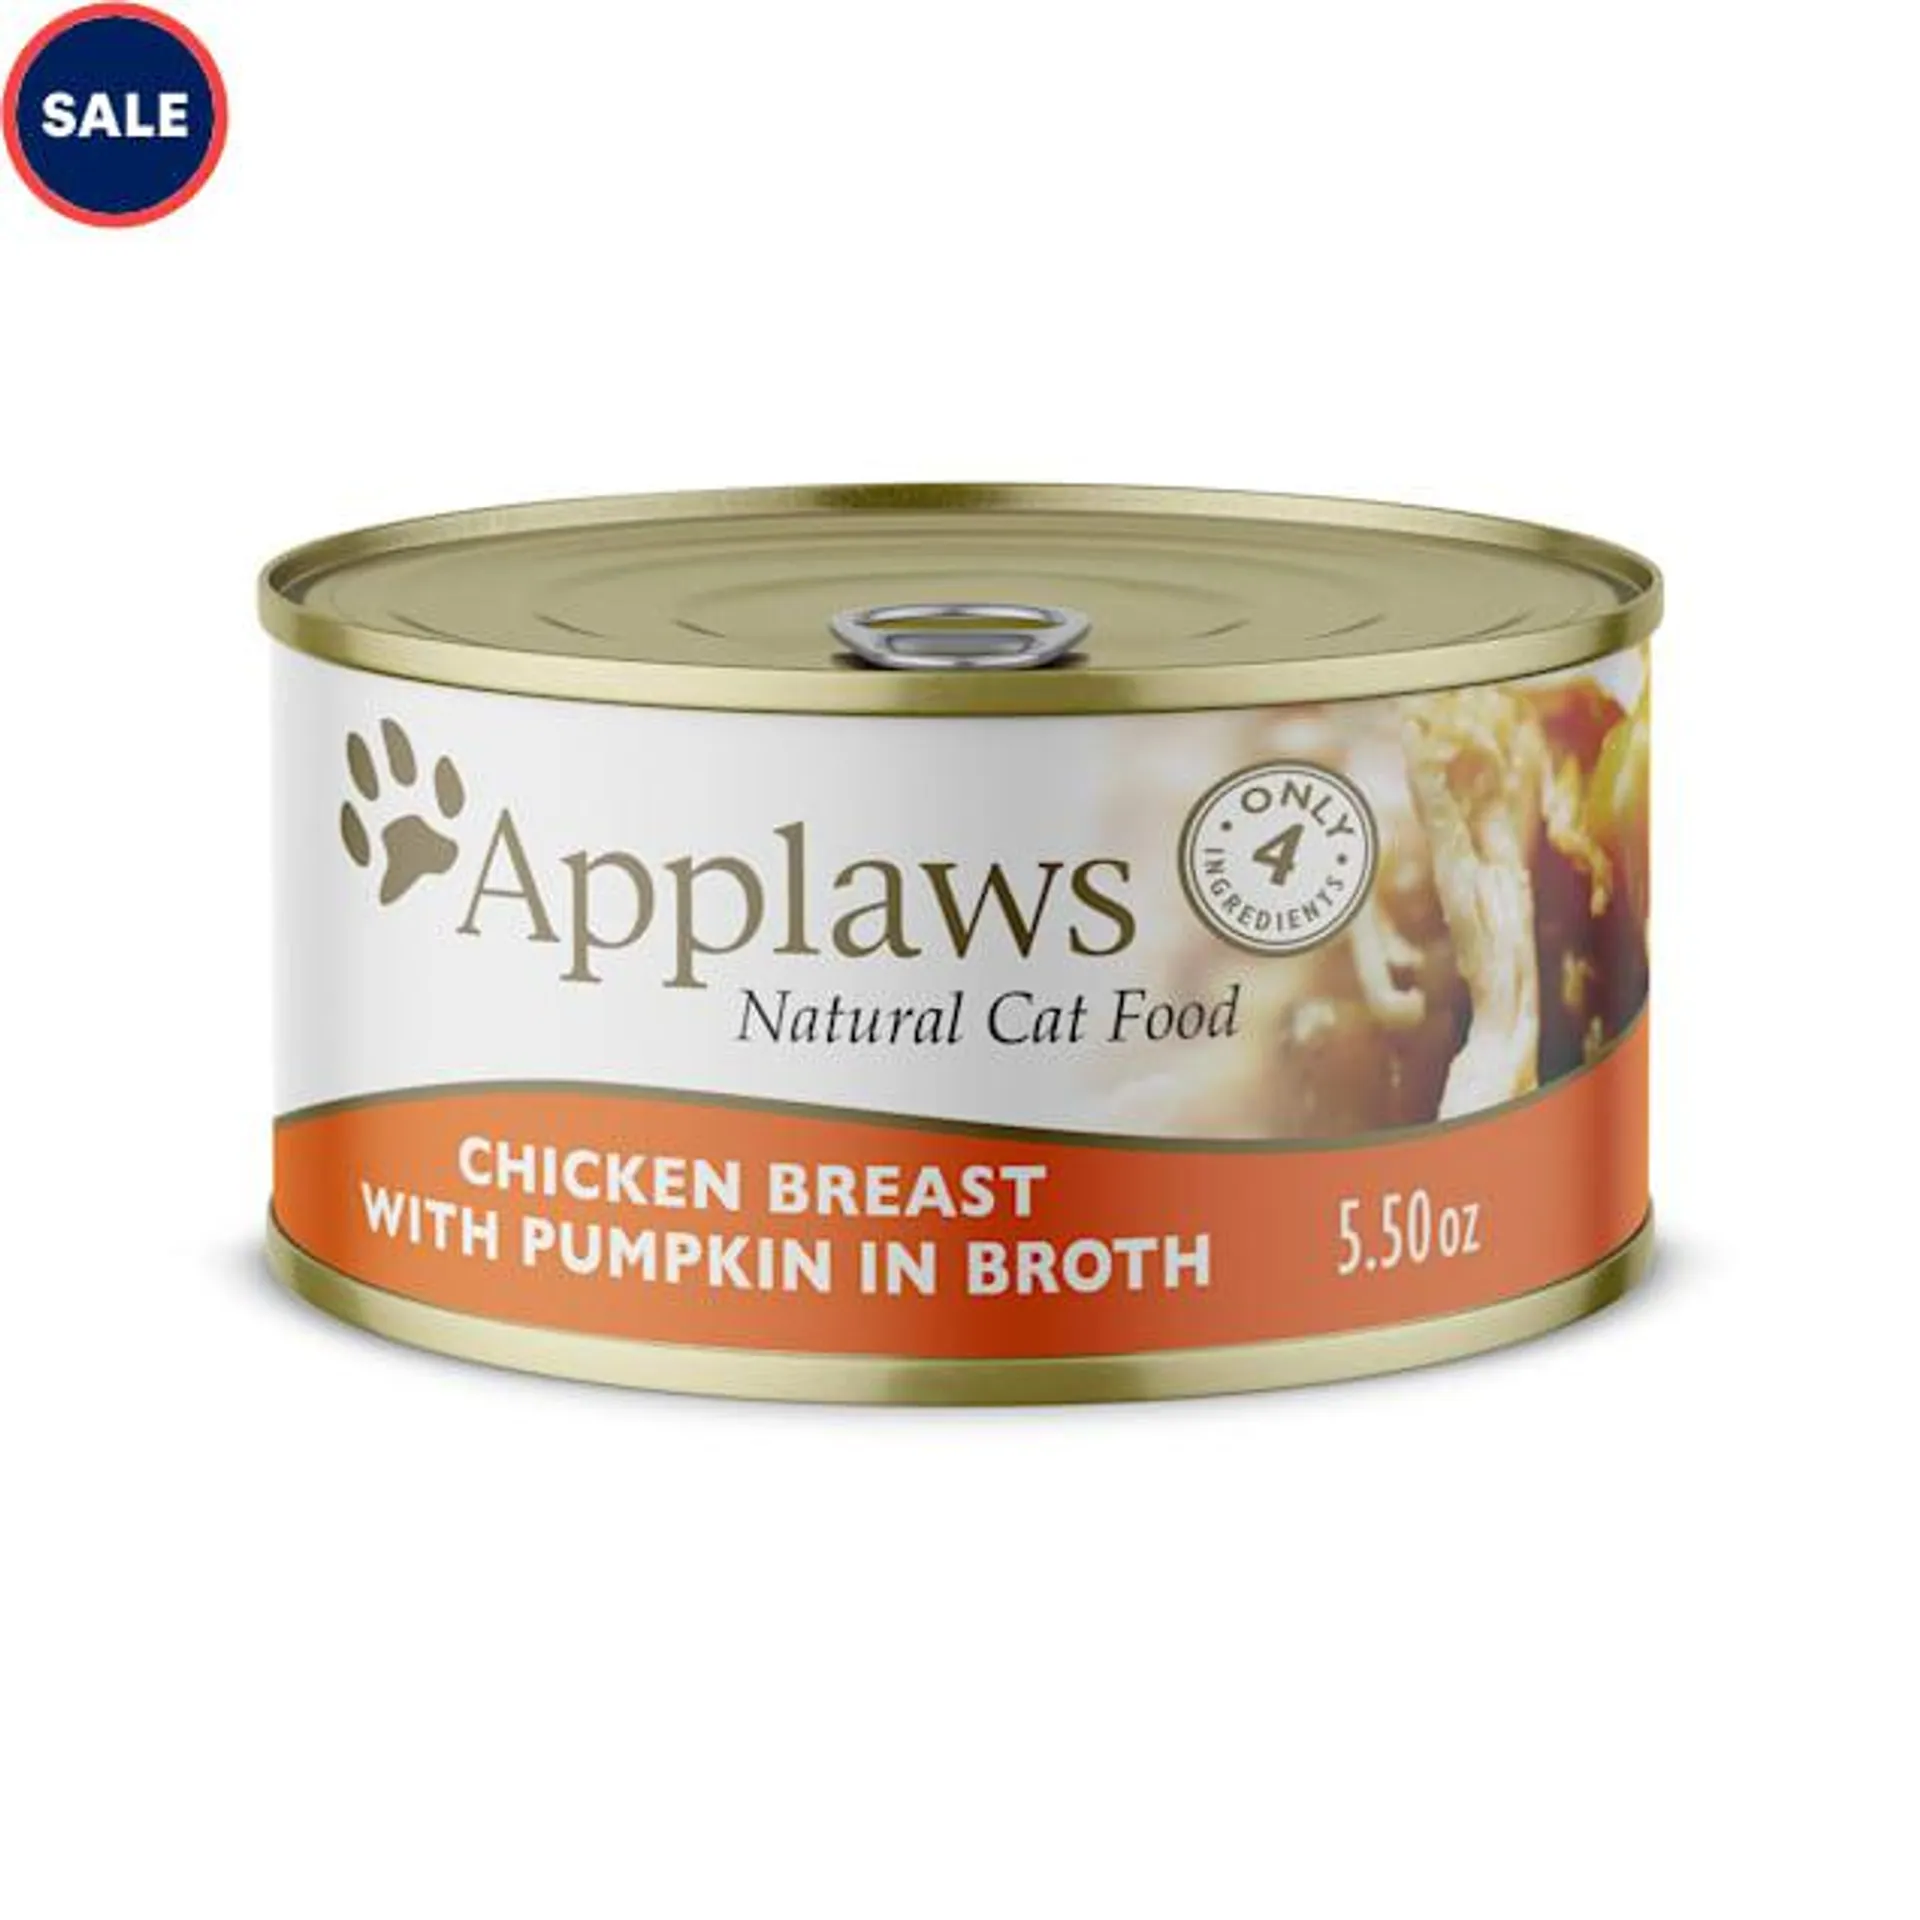 Applaws Natural Chicken Breast with Pumpkin in Broth Wet Cat Food, 5.5 oz., Case of 24